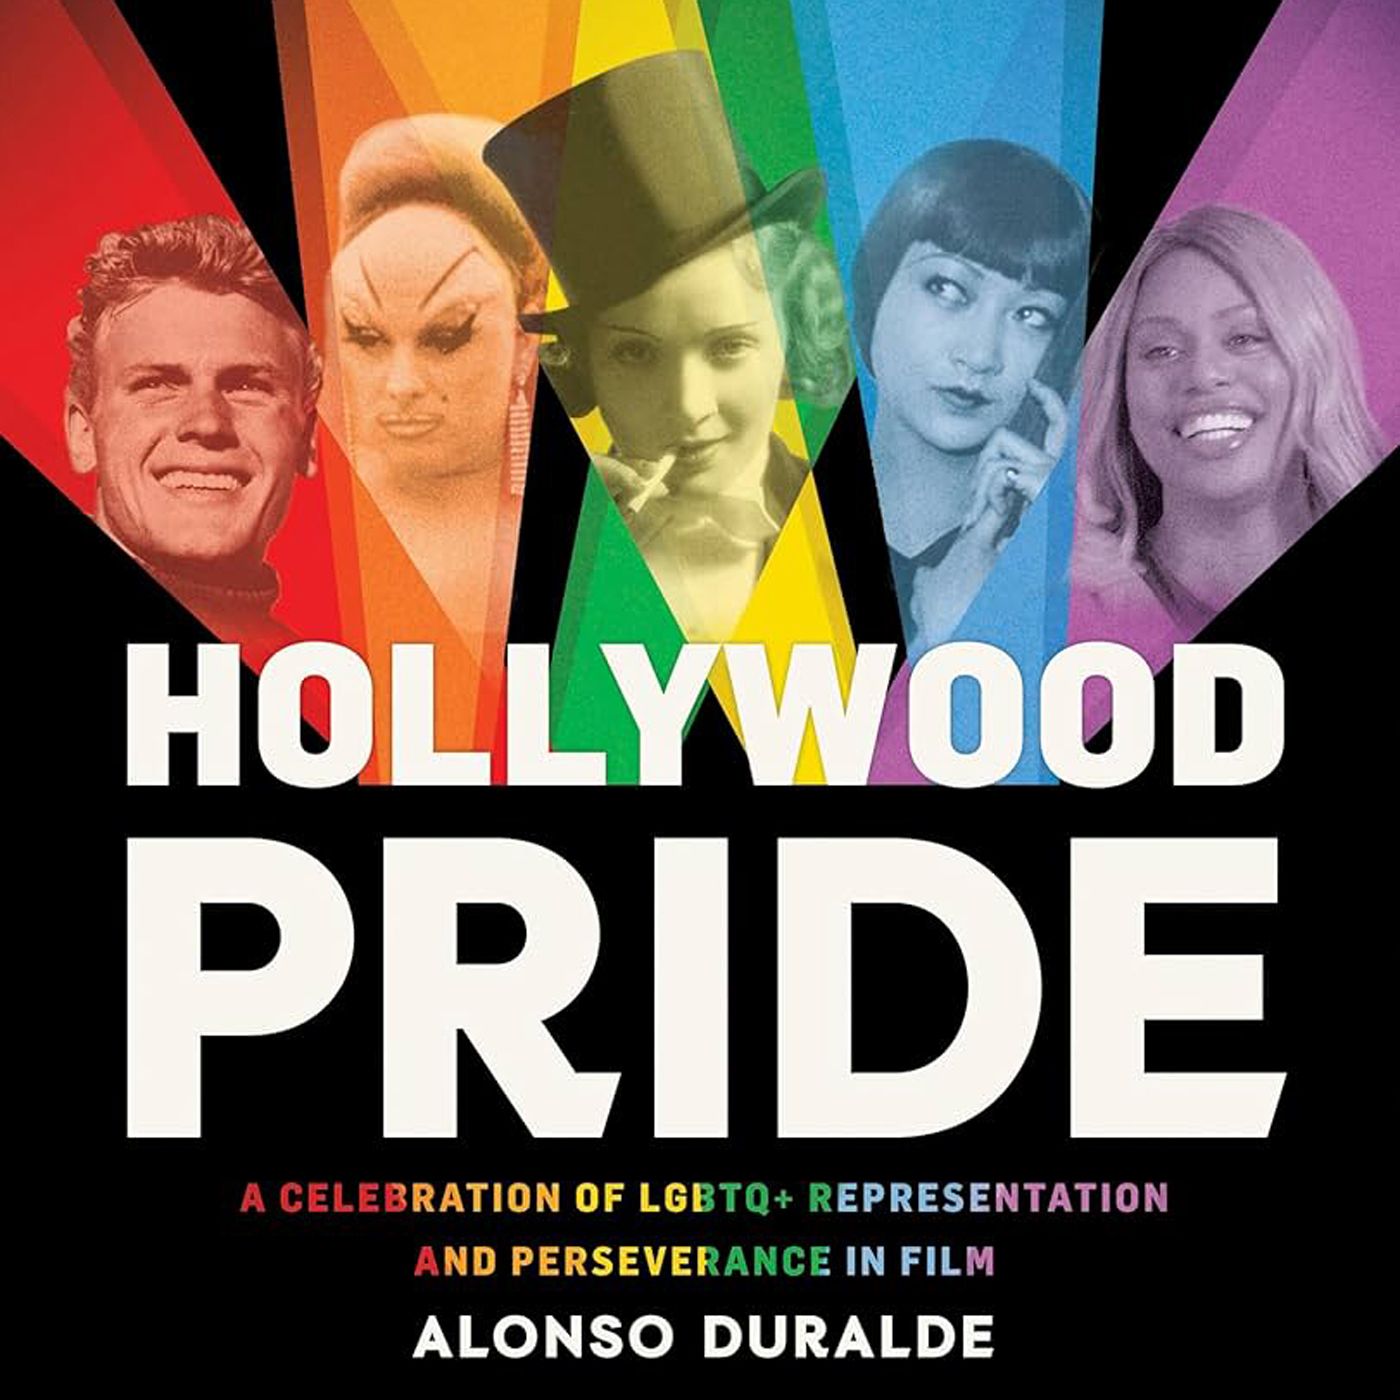 Special Report: Alonso Duralde on Hollywood Pride